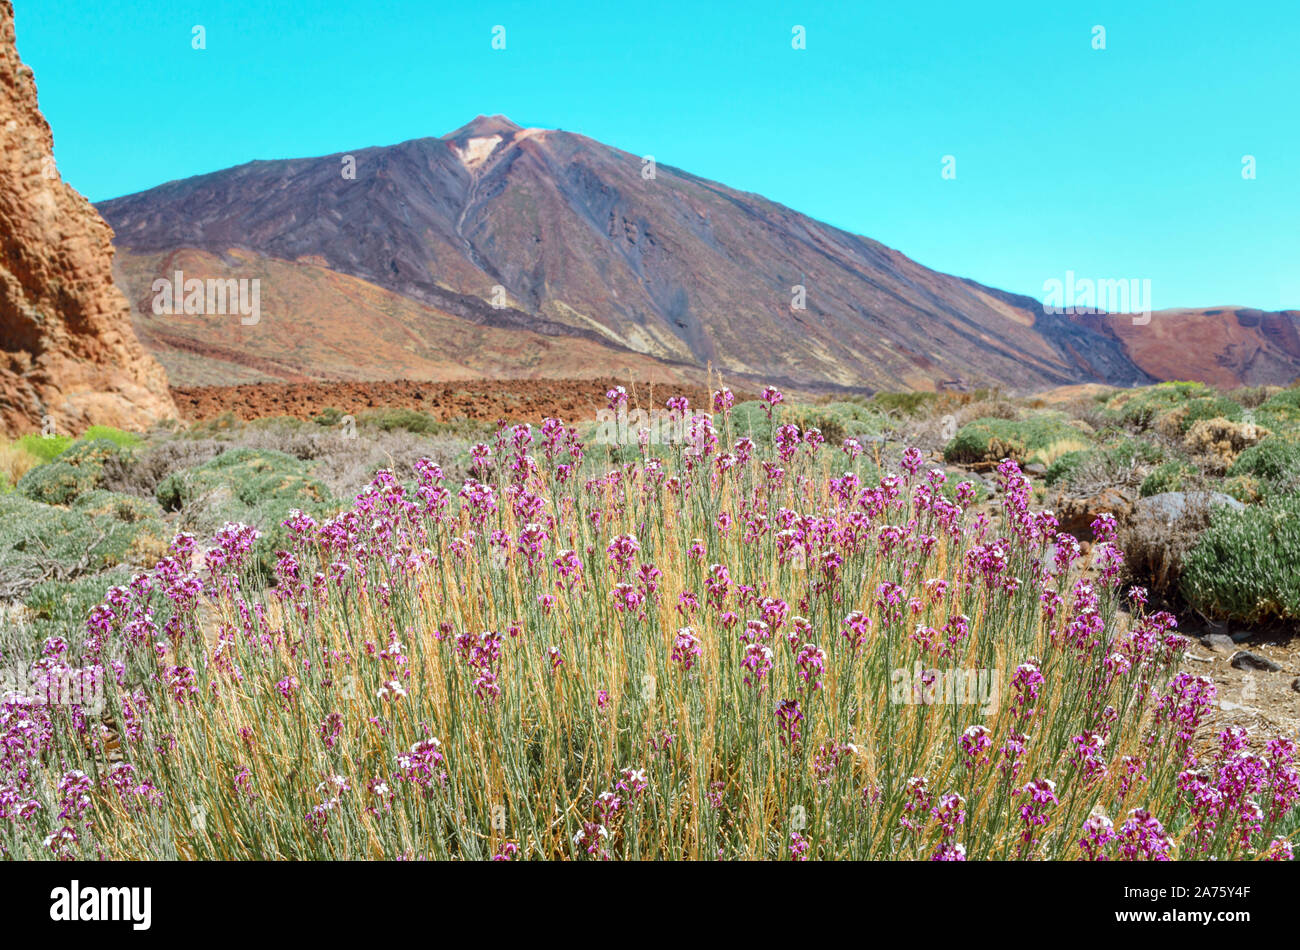 View of Volcano  El Teide  with typical flowers Alheli del Teide (Erysimum scoparium) in The National Park of Las Canadas del Teide. Best place to vis Stock Photo